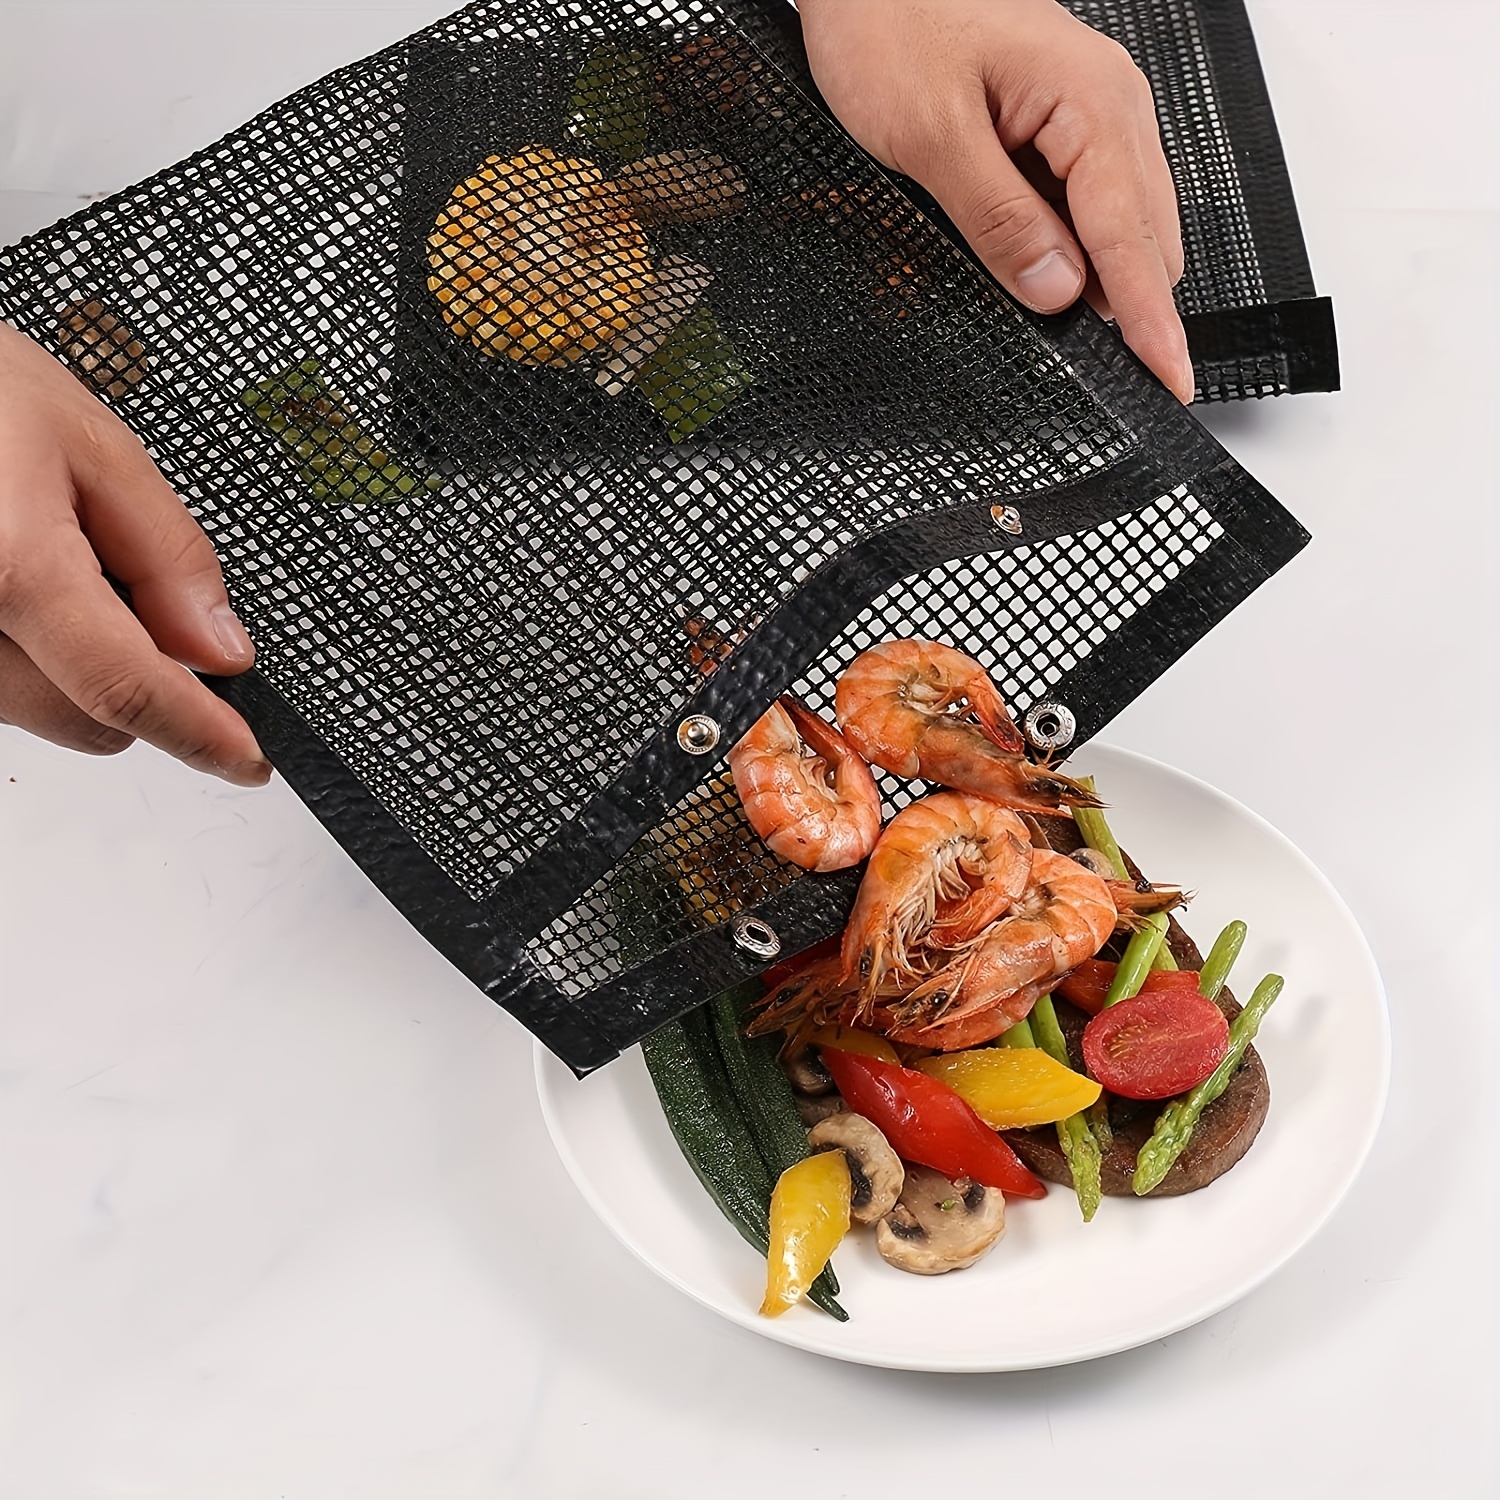 Bbq Mesh Grill Bag, Non-stick Mesh Grilling Bags, Reusable And Easy To  Clean, Vegetables Grilling Pouches Grill Accessories Bbq Tools, Works On  Electric Grill Outdoor Gas Charcoal Bbq, For Outdoor Camping Picnic